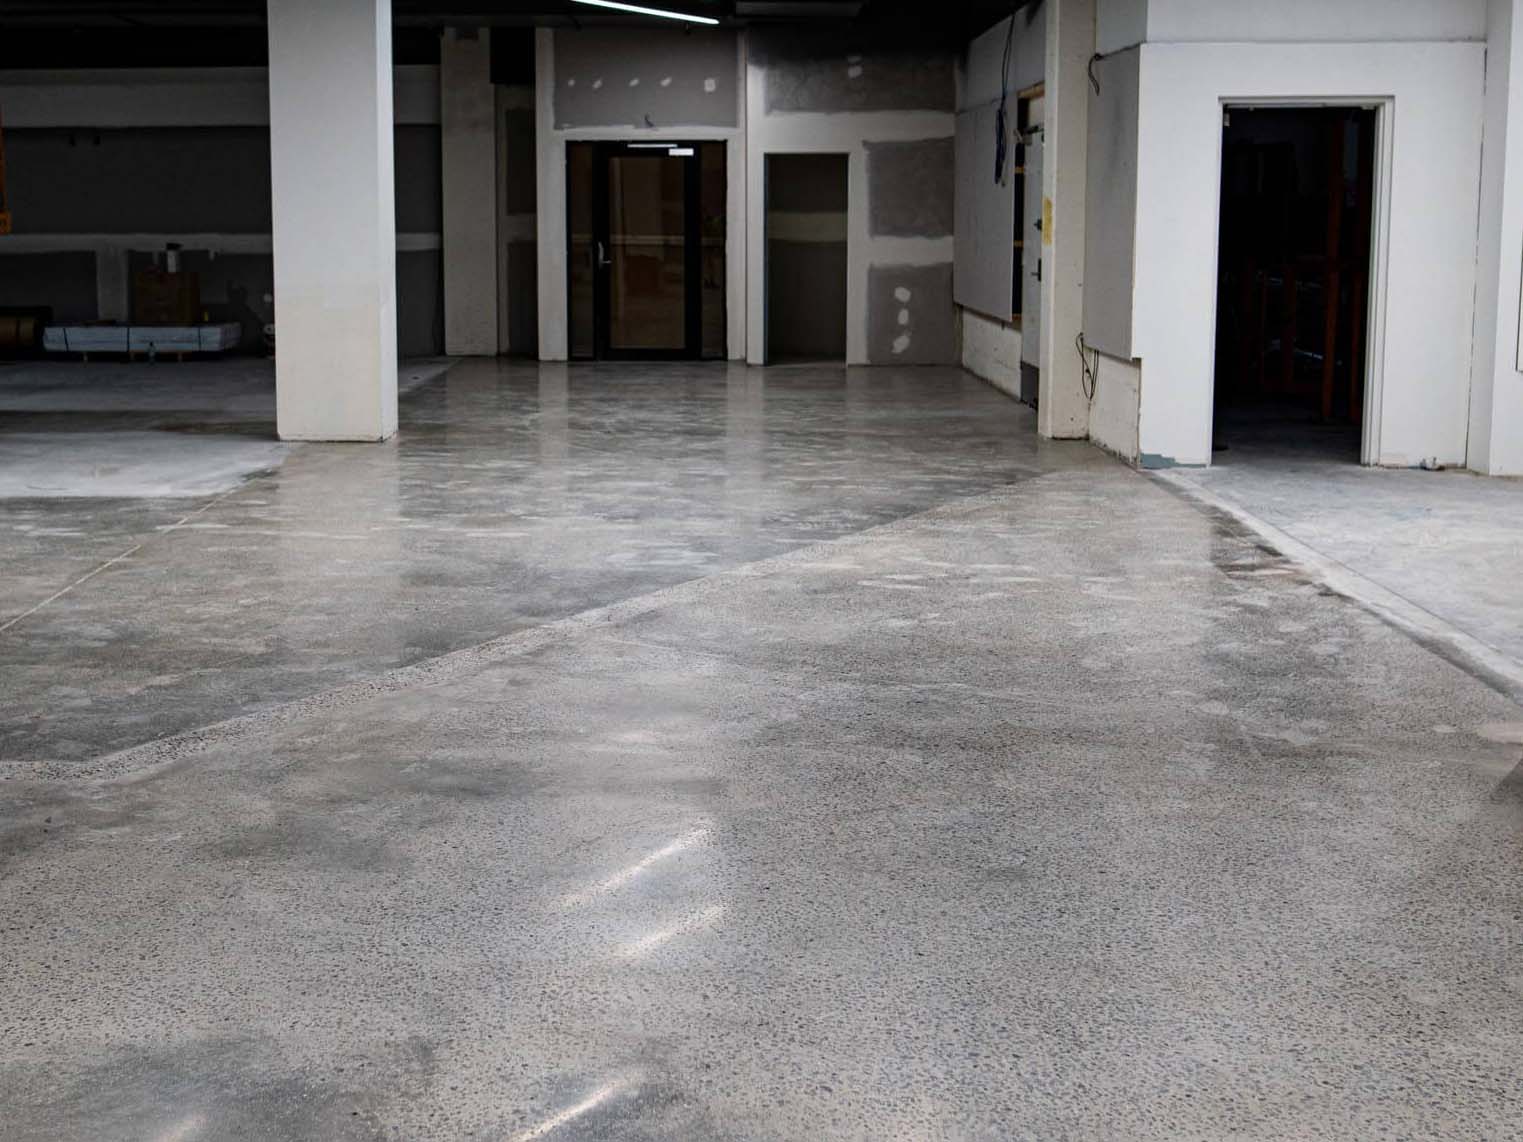 The Properties of Industrial Diamonds in Polished Concrete